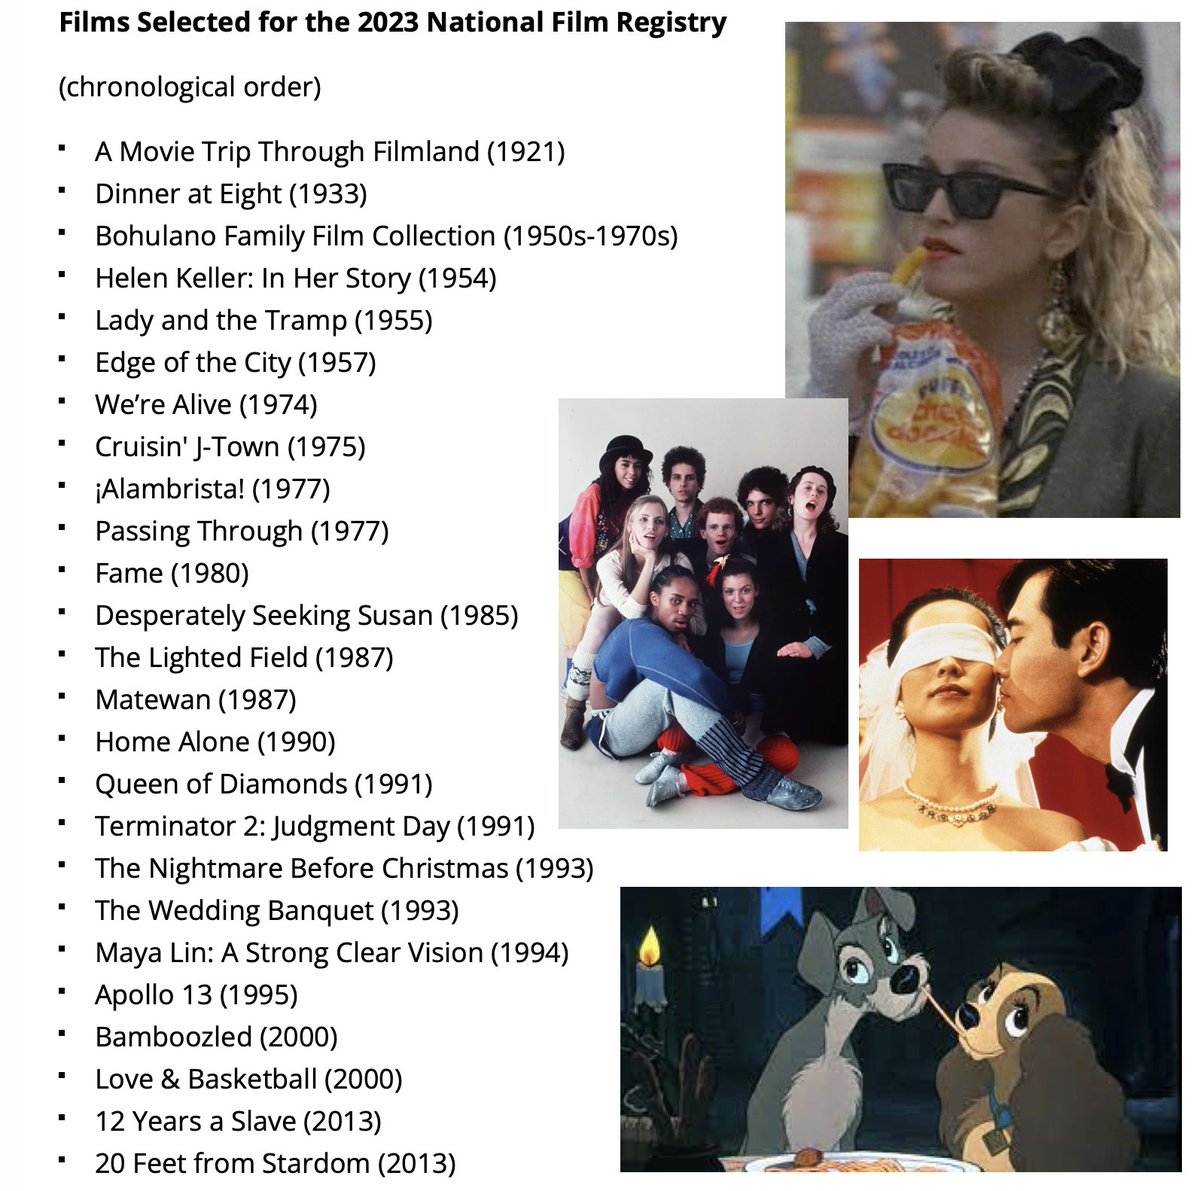 Great choices! These films join an elite list of others so honored, from 1891-2013. #libraryofcongress #nationalfilmregistry